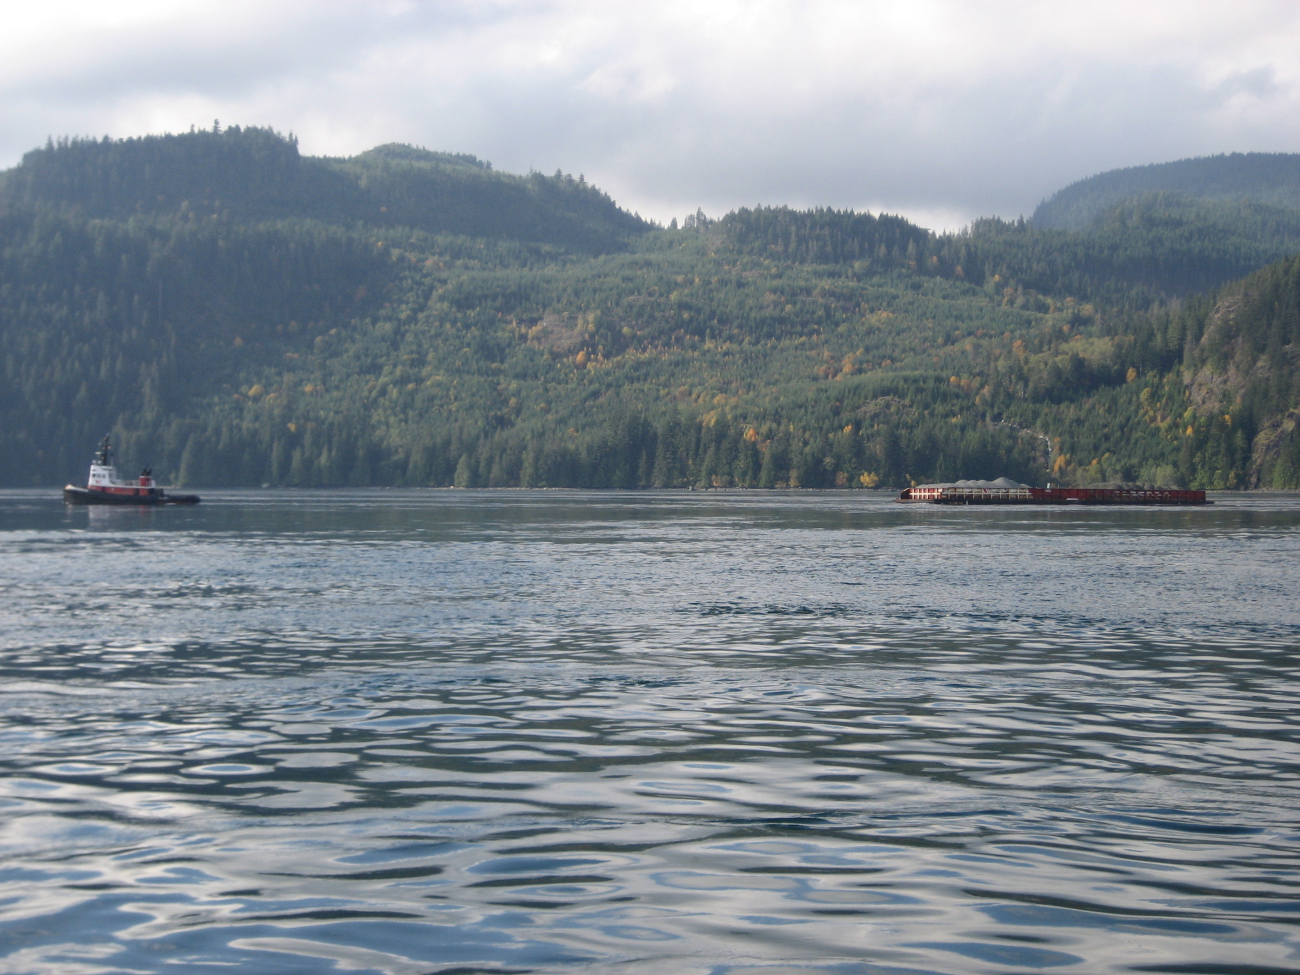 Tug and tow in the Inside Passage on the NE side of VancouverIsland